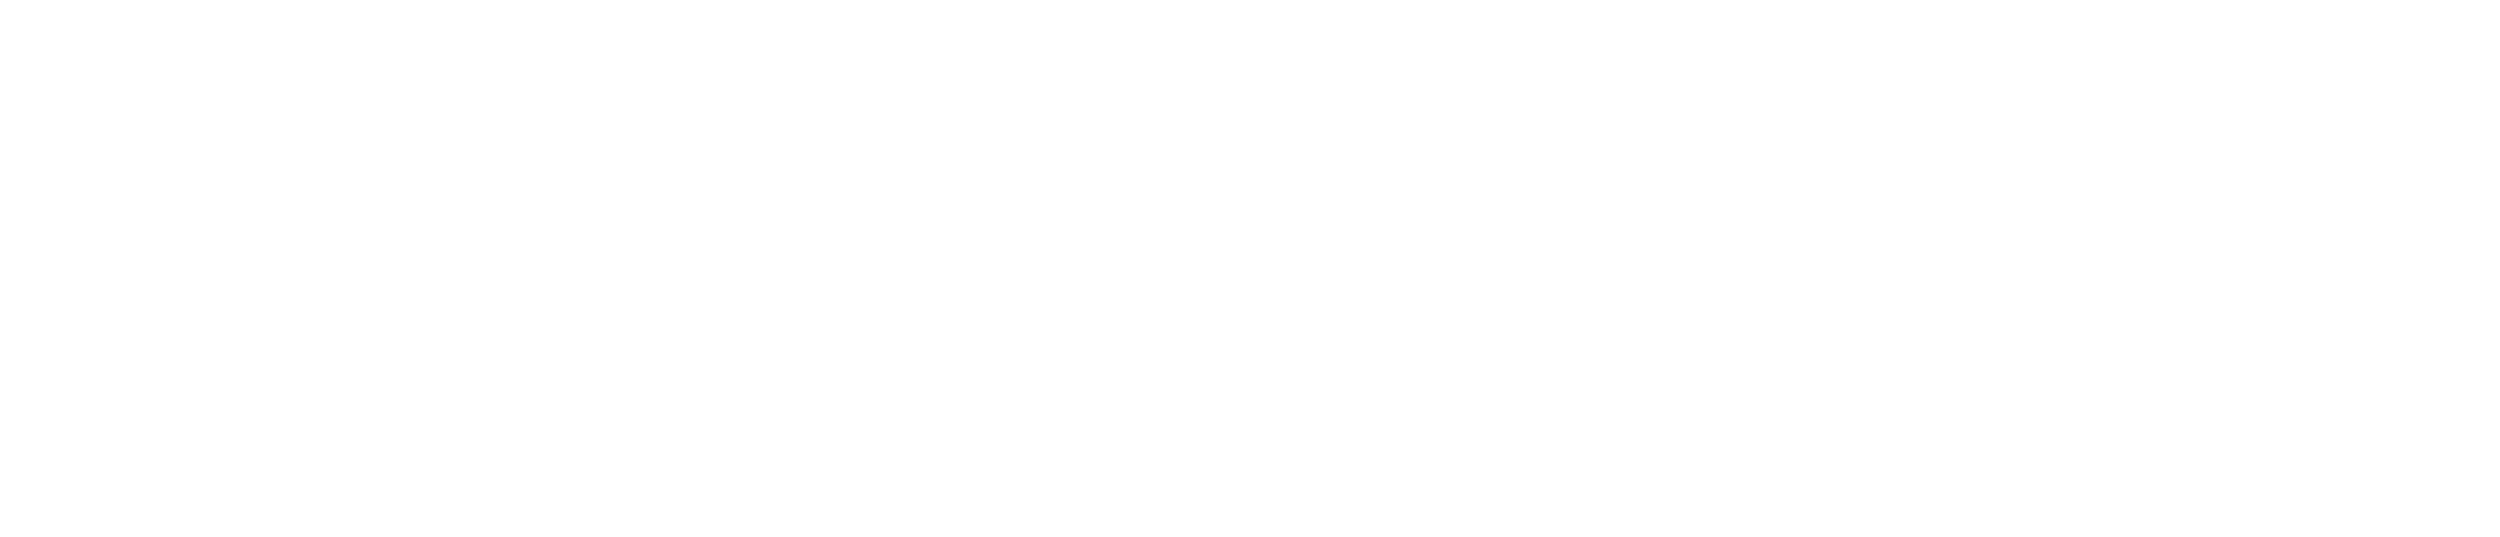 discovery-channel-3-logo.png